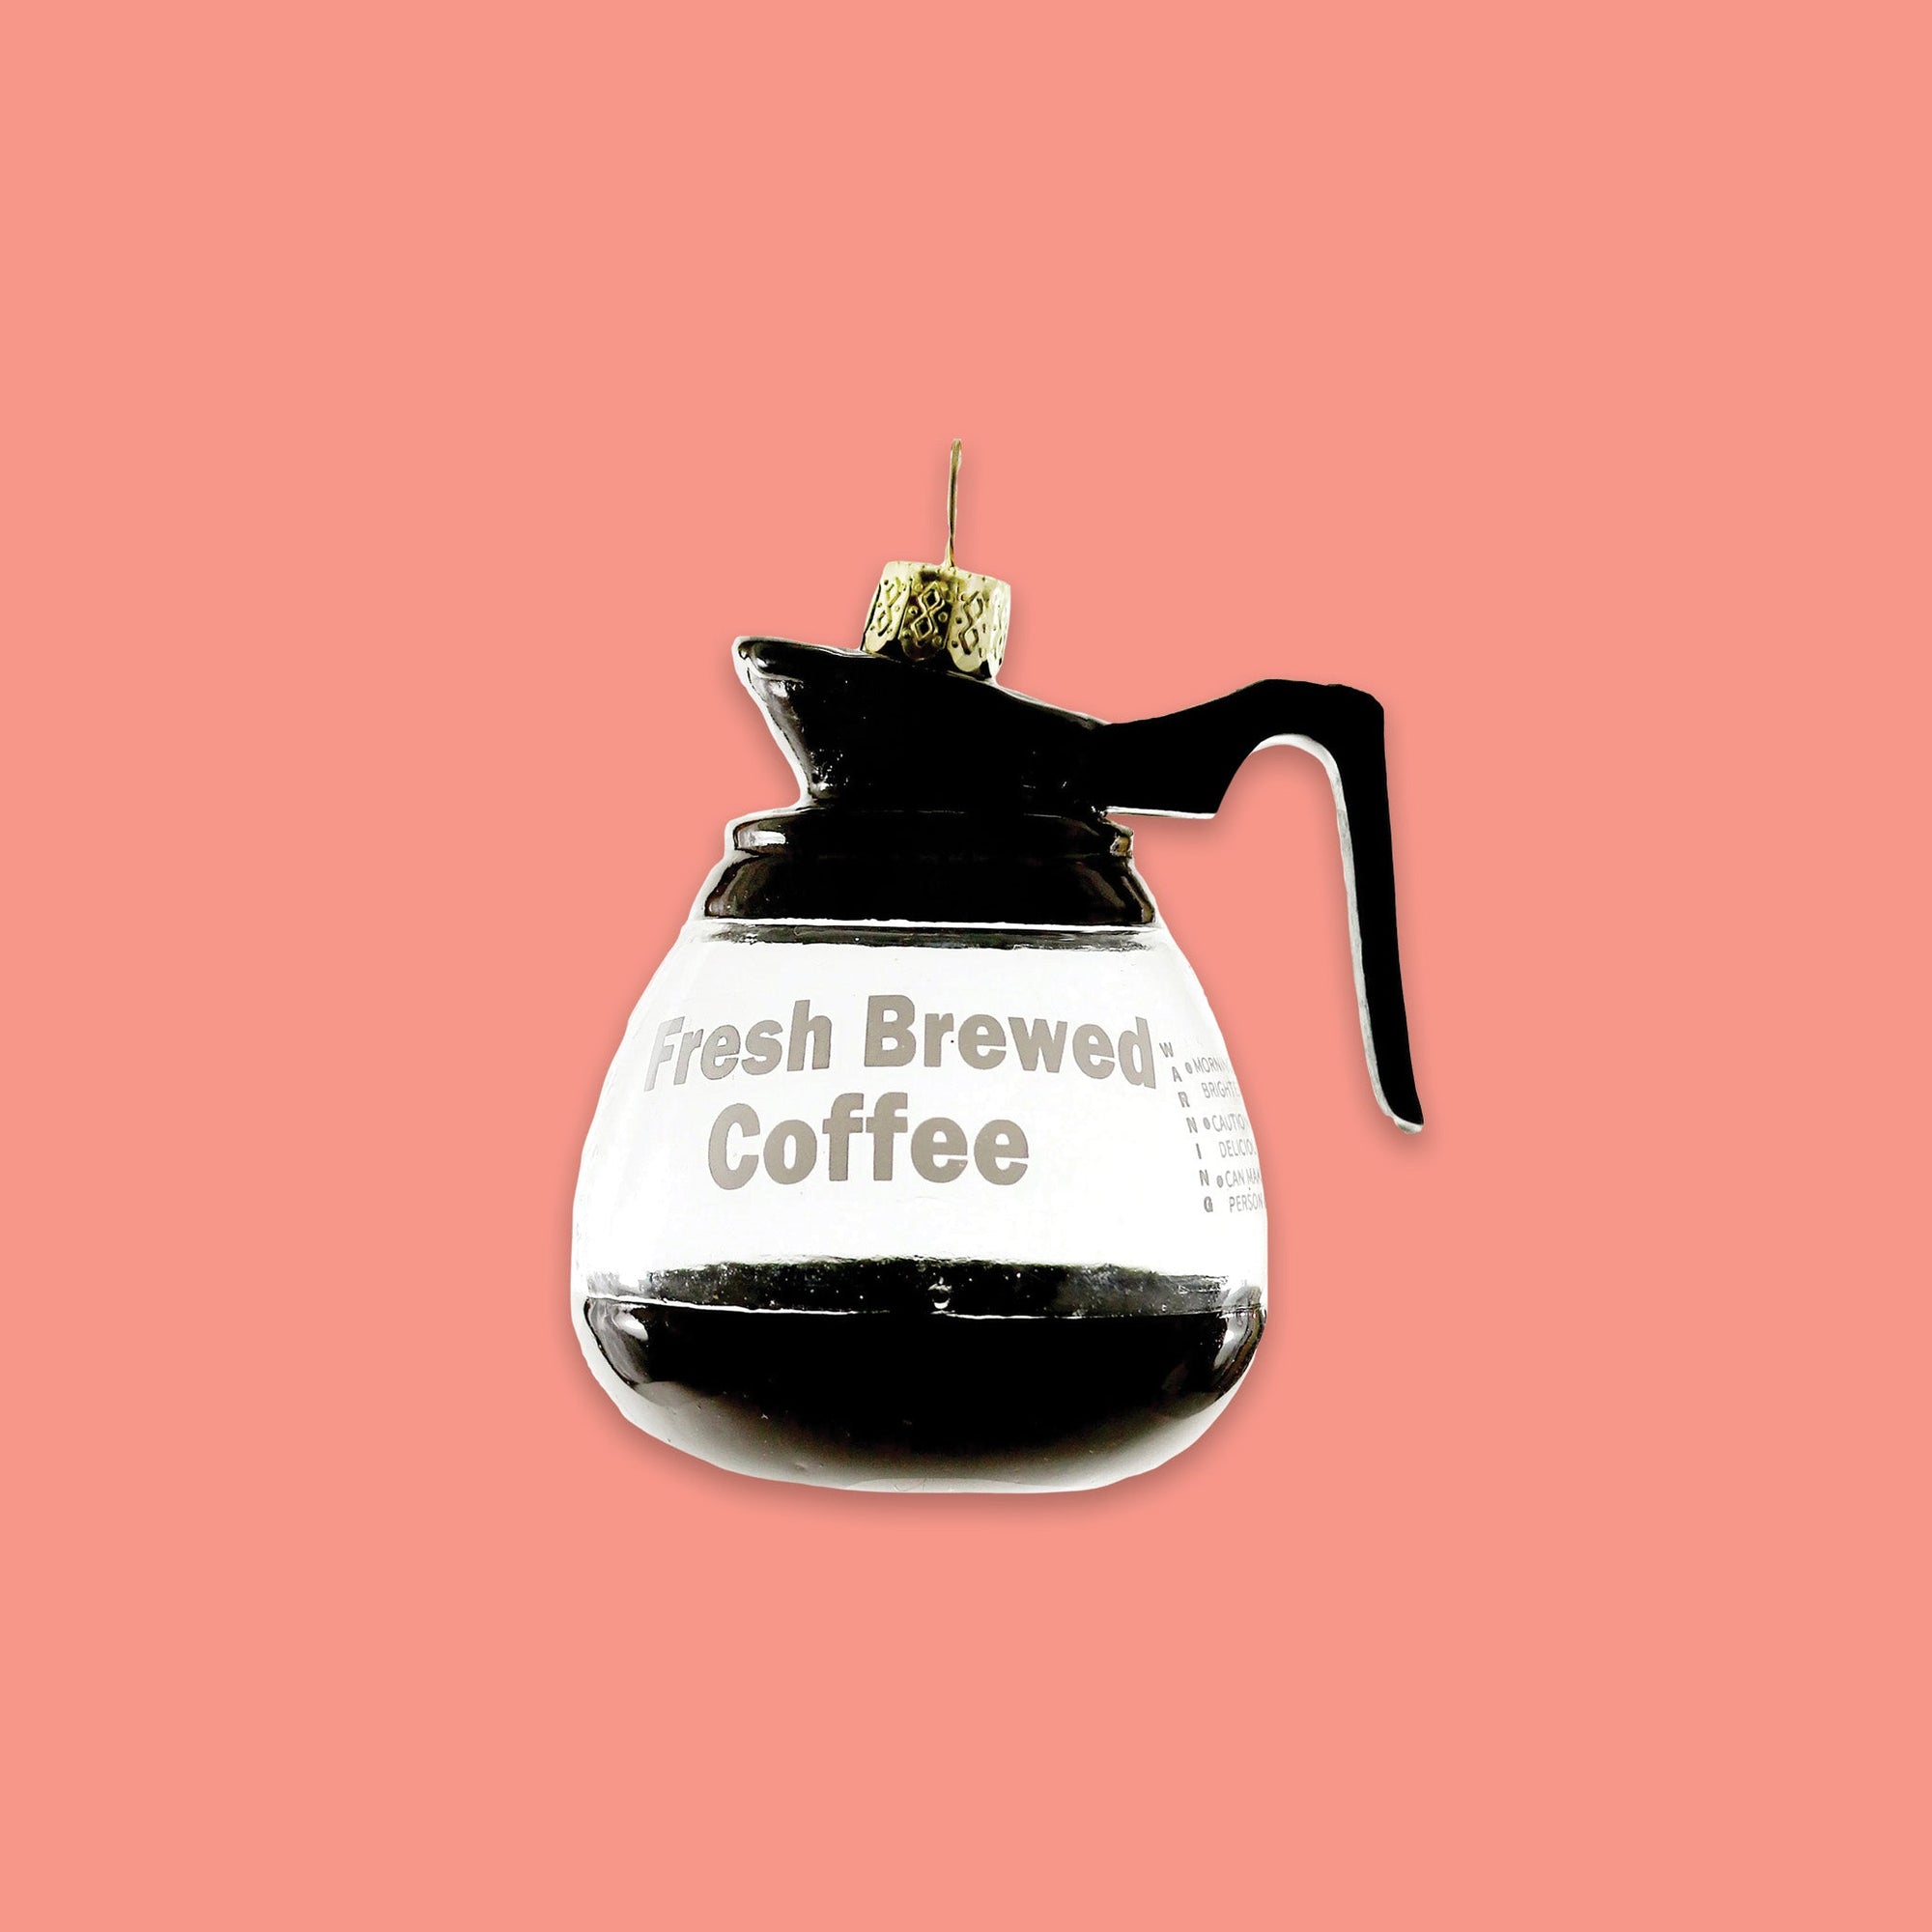 On a coral pink background sits an ornament. This pot of coffee glass ornament says "Fresh Brewed Coffee." It looks like a real pot of coffee and there is coffee inside.